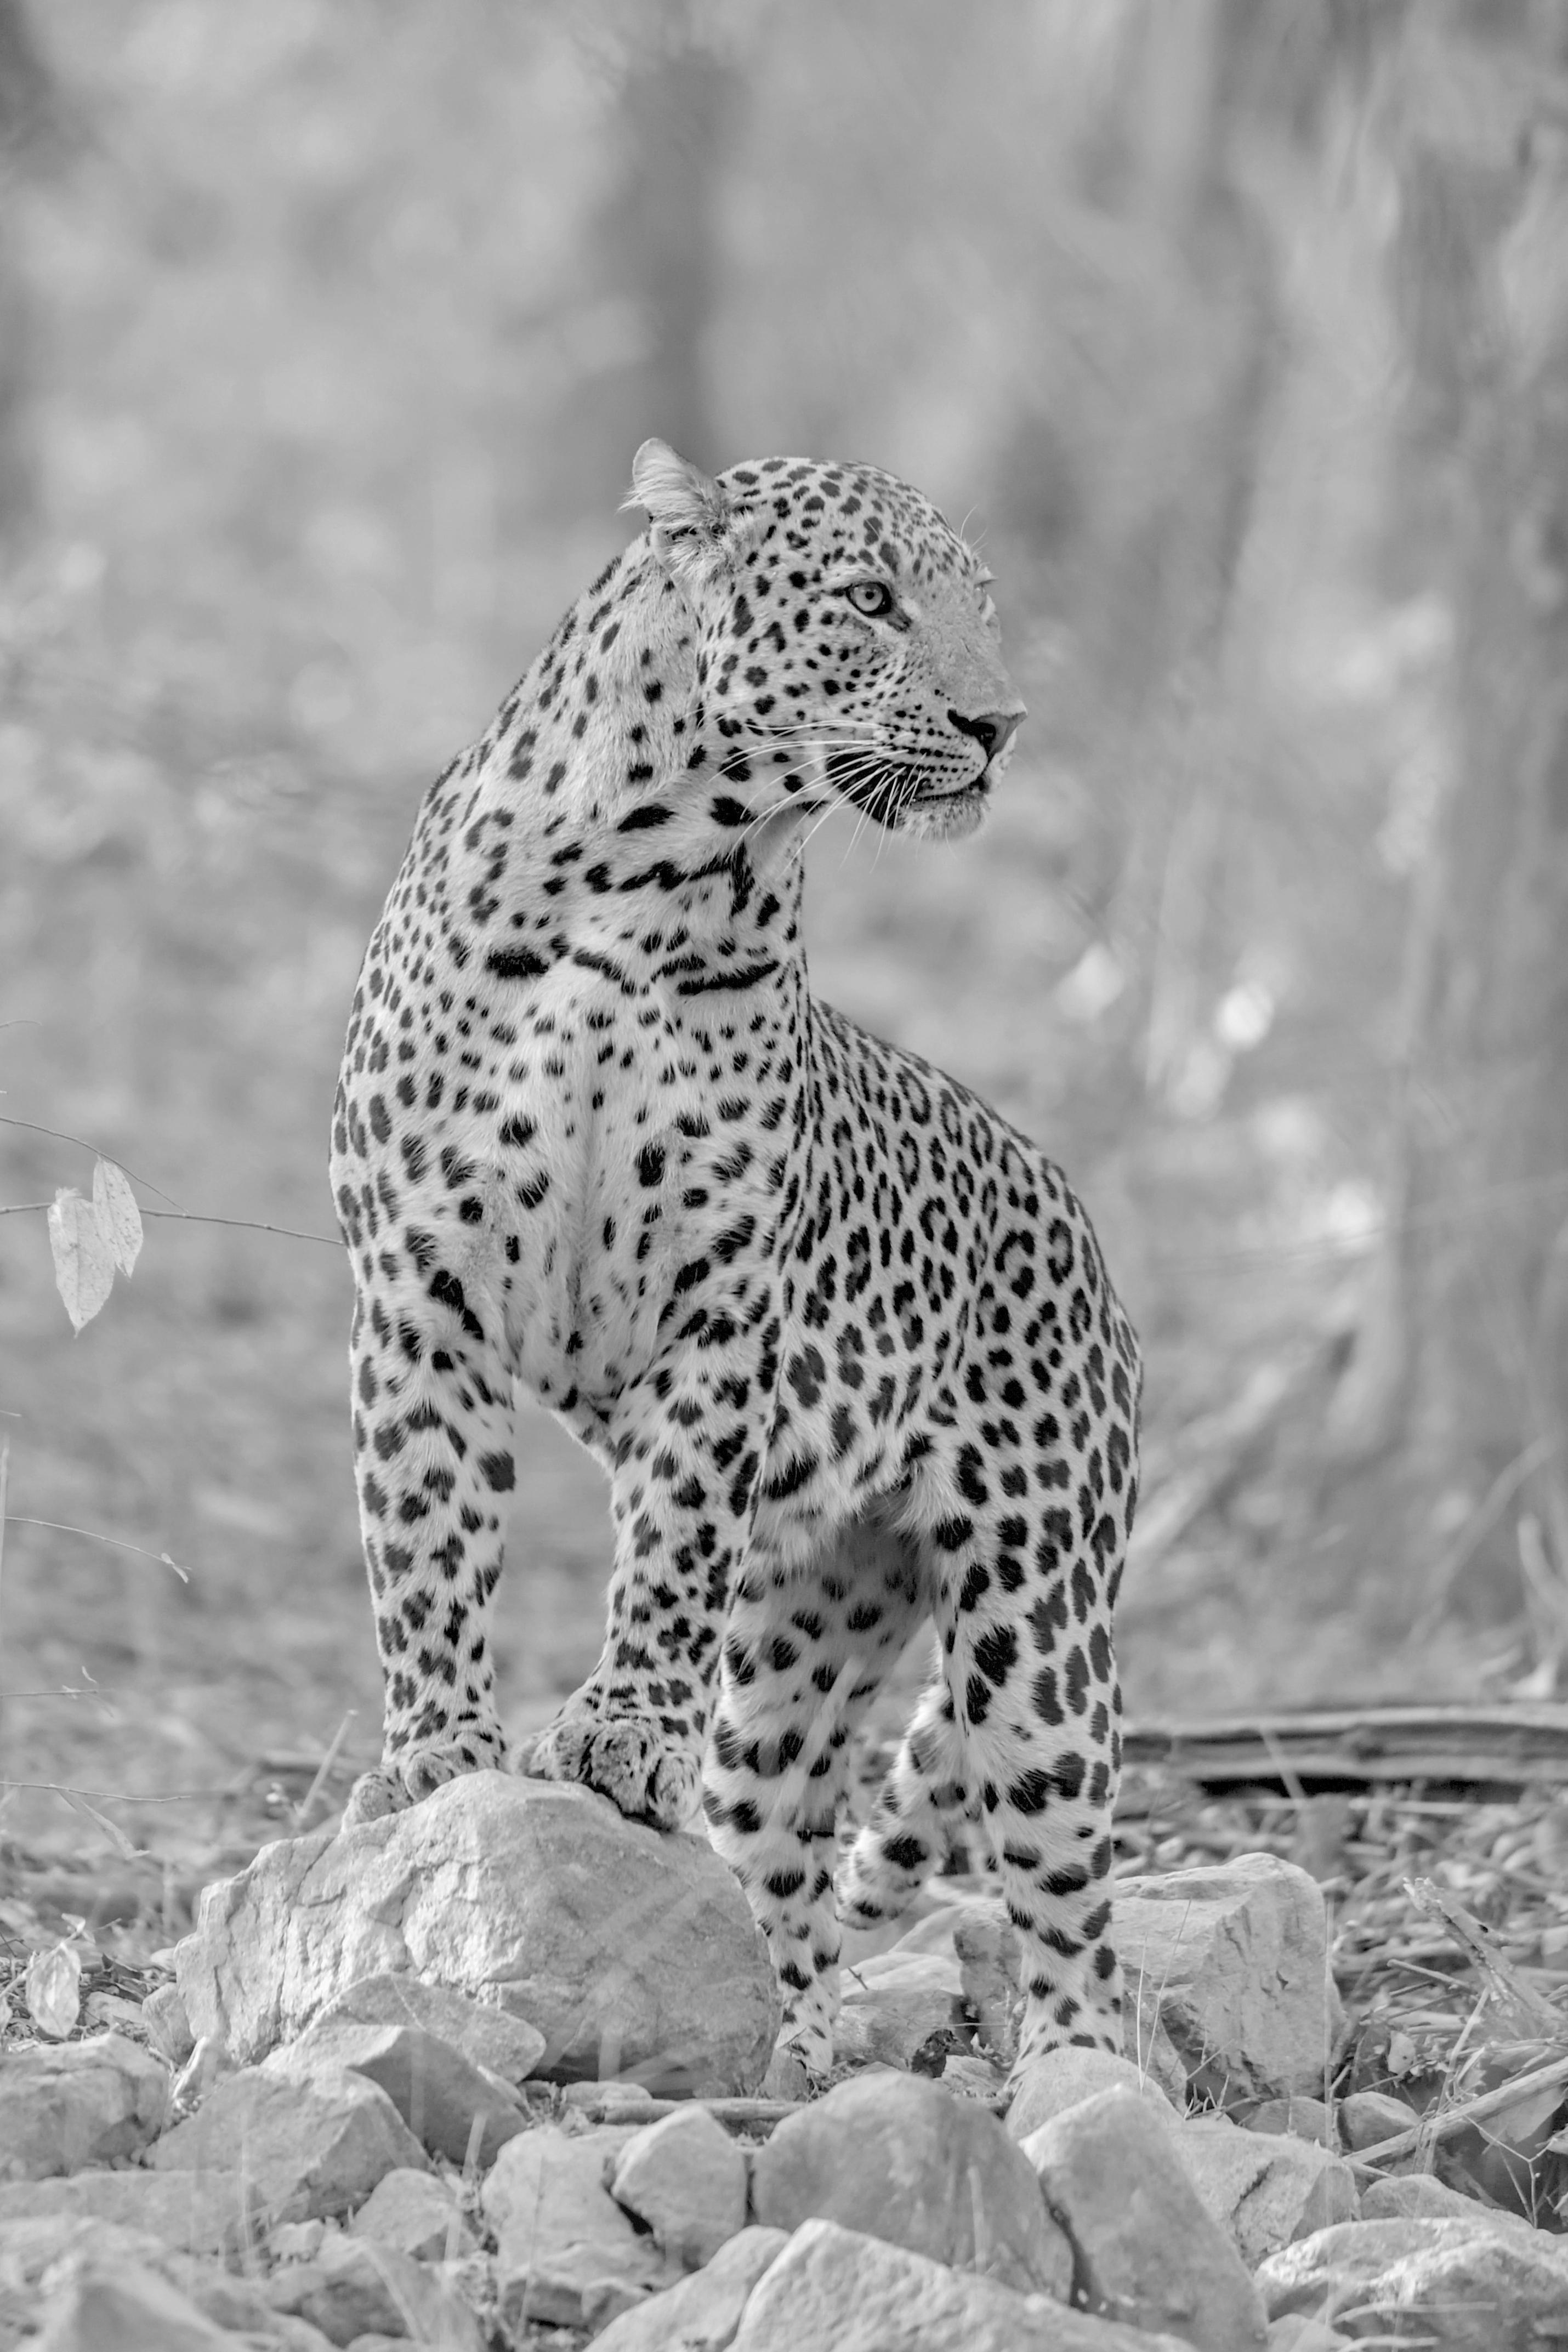 Aditya Dicky Singh Black and White Photograph - Large Leopard Black White Landscape Photograph Nature Wildlife Cat Forest Kenya